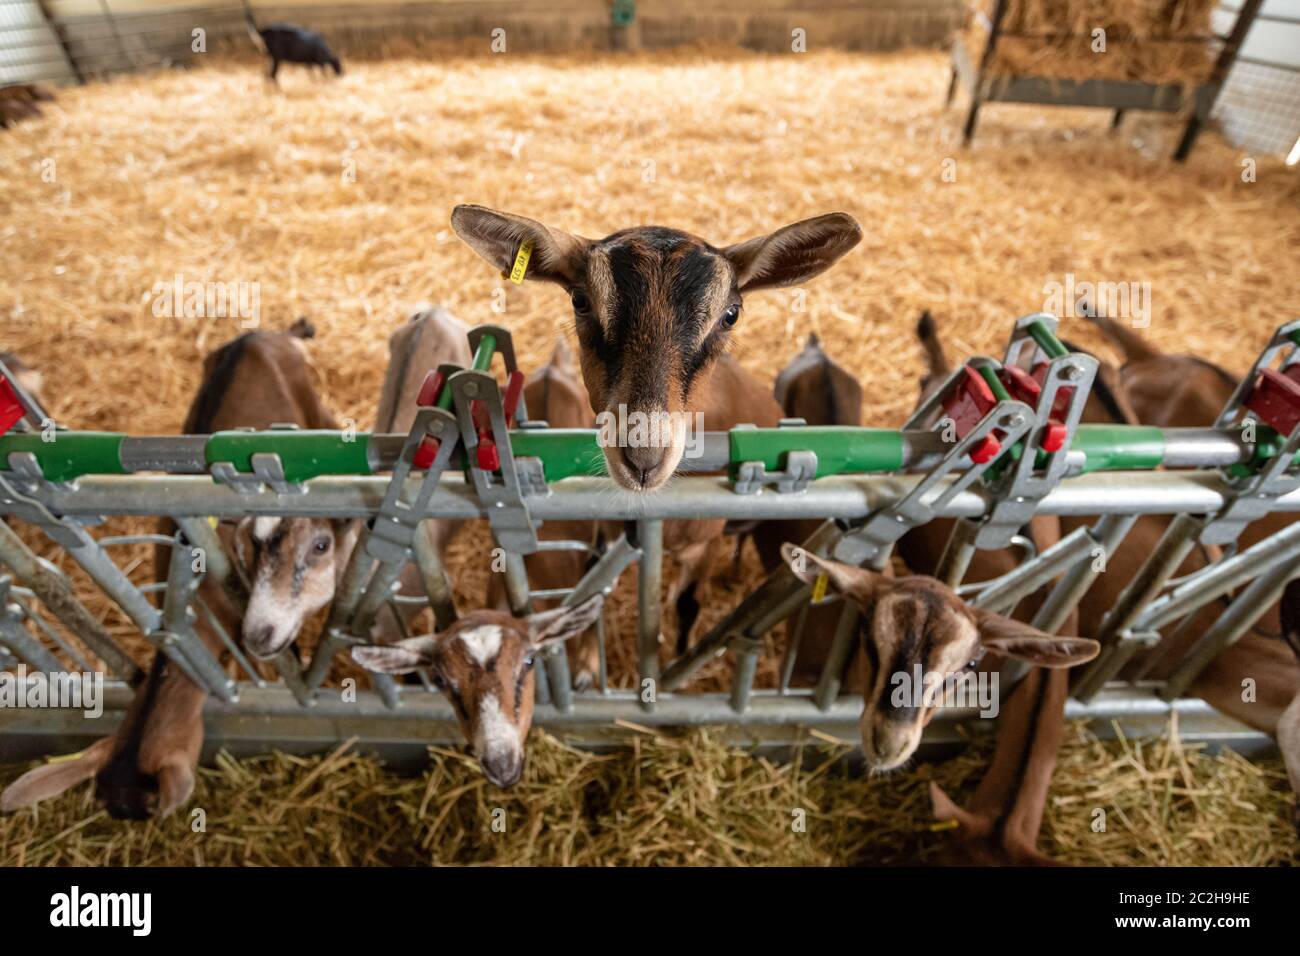 Brown goat watching the camera while others are browsing hay in a farm. Stock Photo